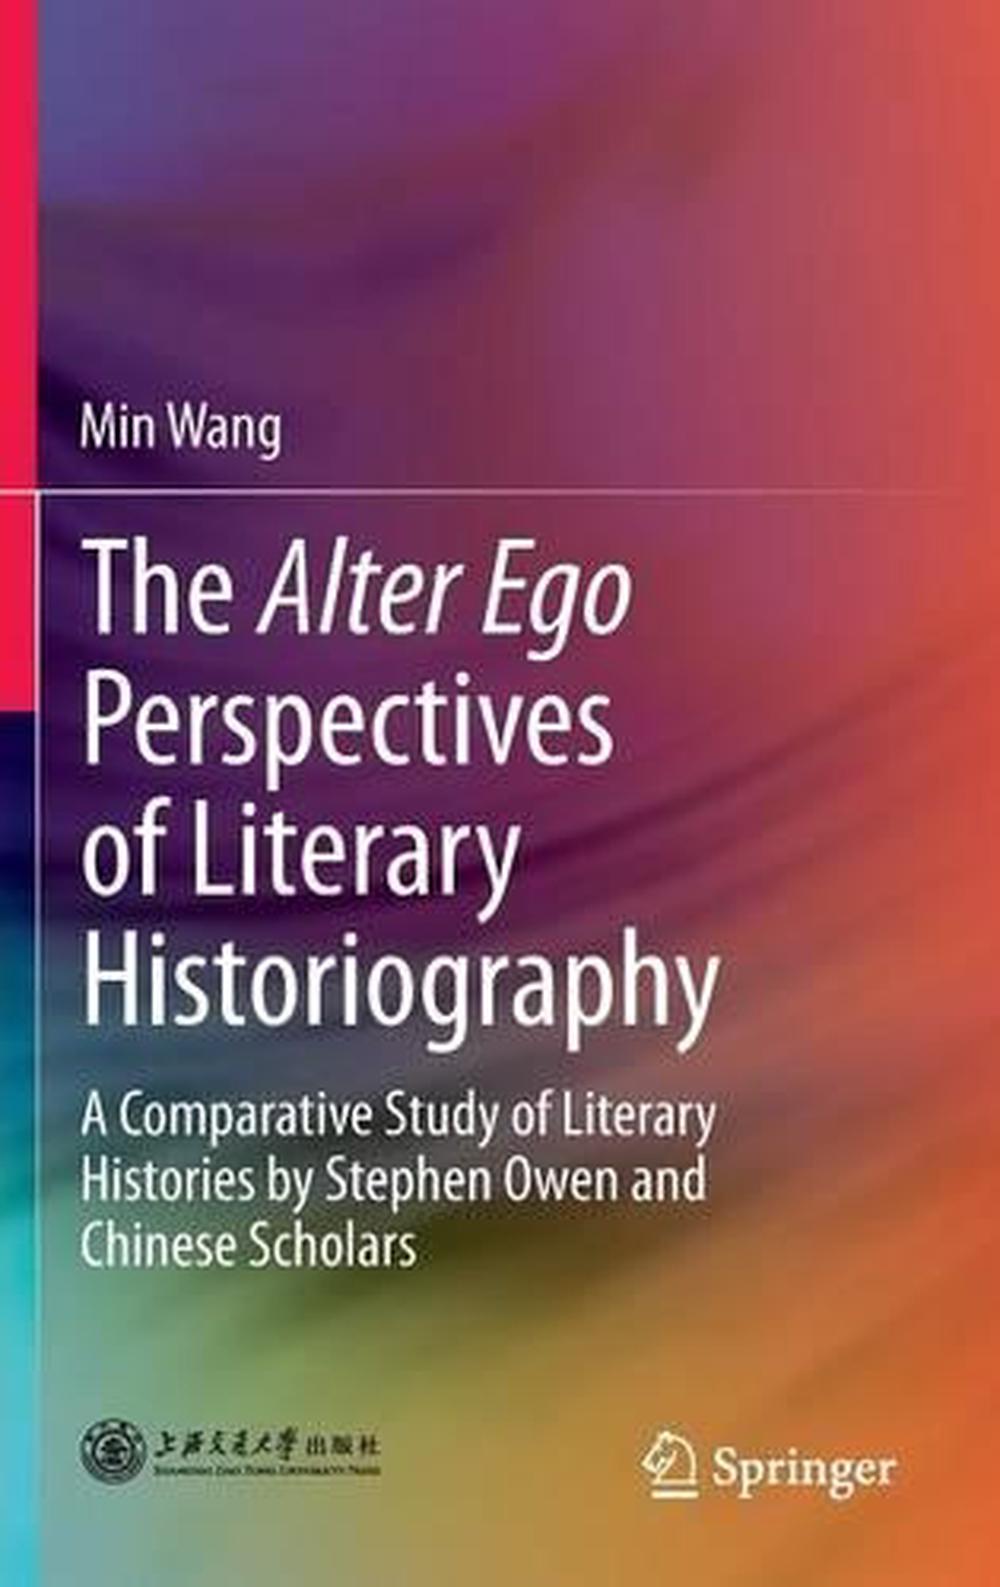 The Alter Ego Perspectives of Literary Historiography: A Comparative